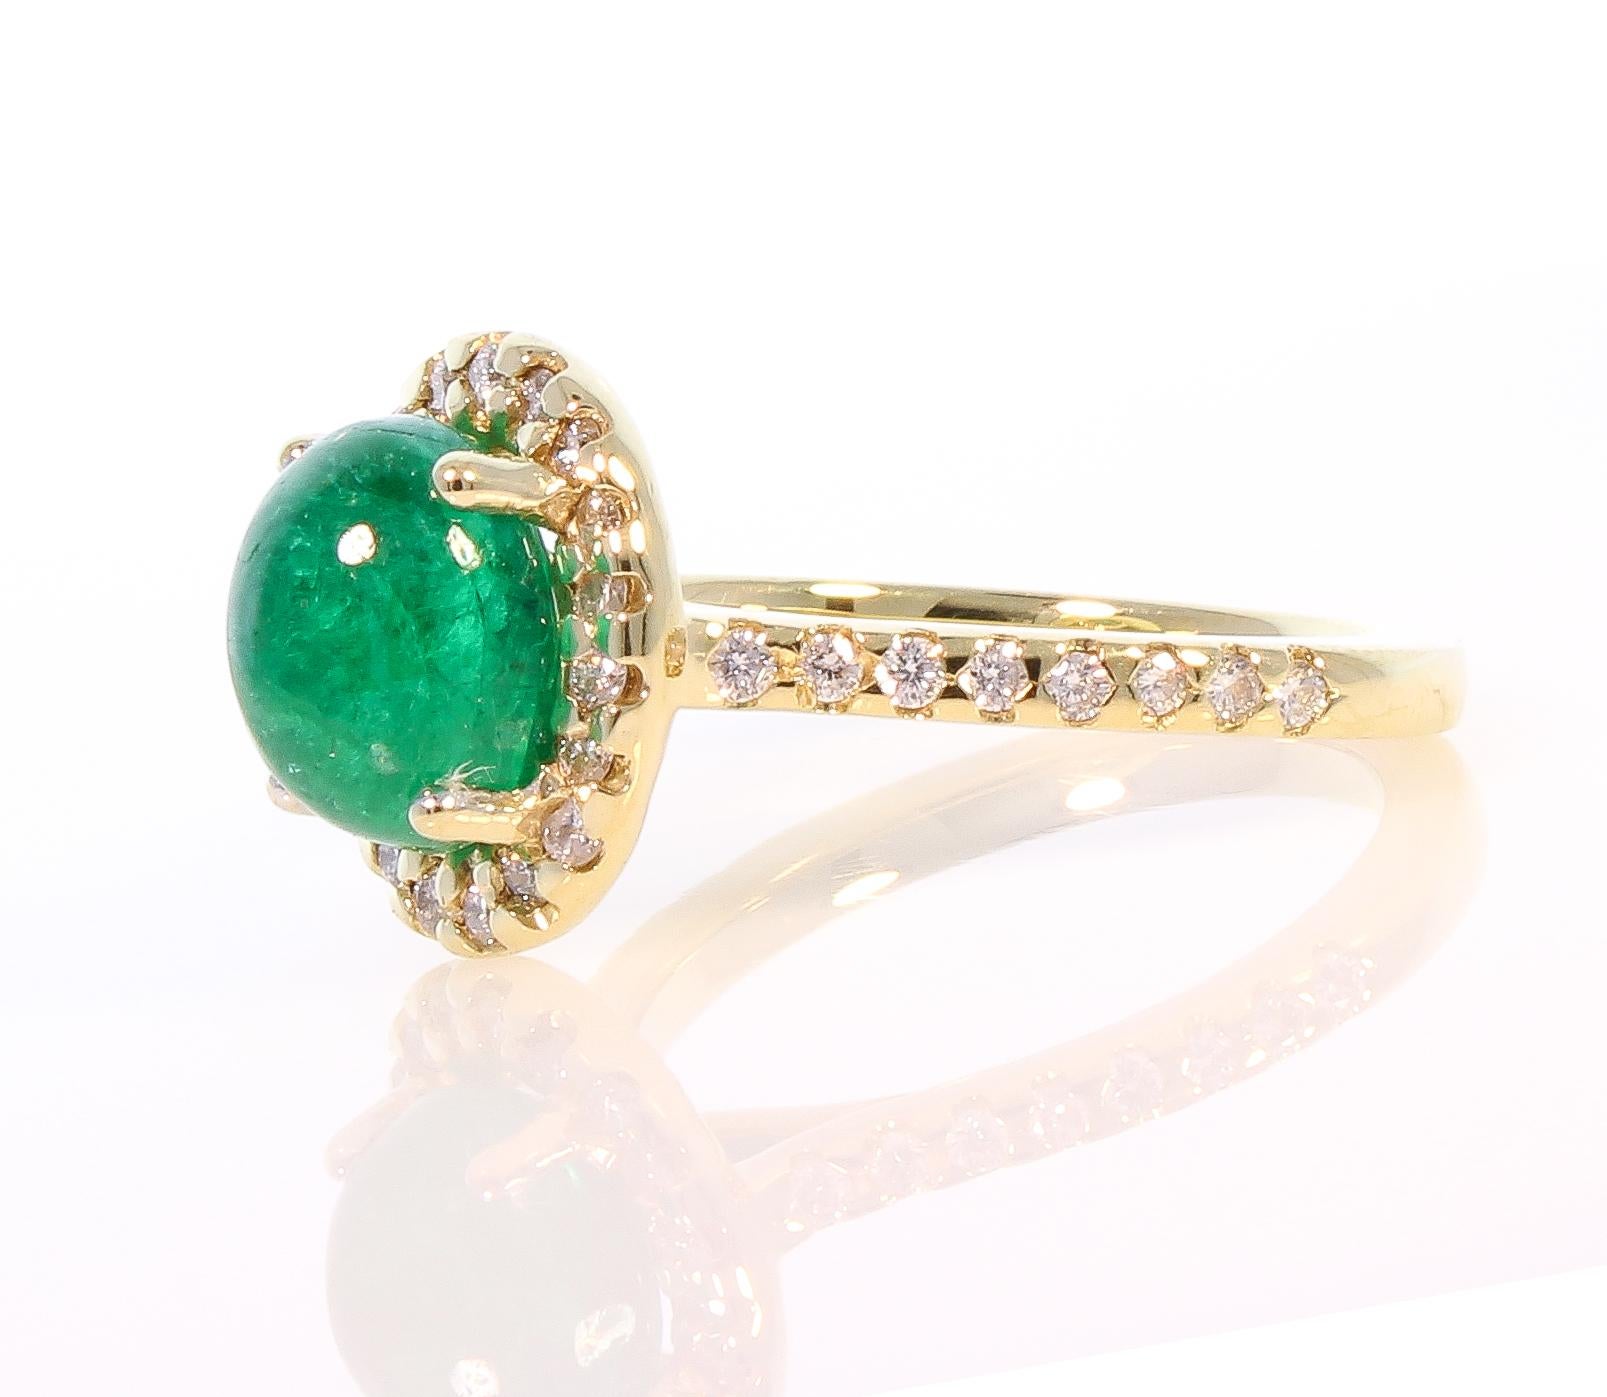 Contemporary 2.31 Carat Cabochon Emerald and Diamond Cocktail Ring in 18 Karat Yellow Gold